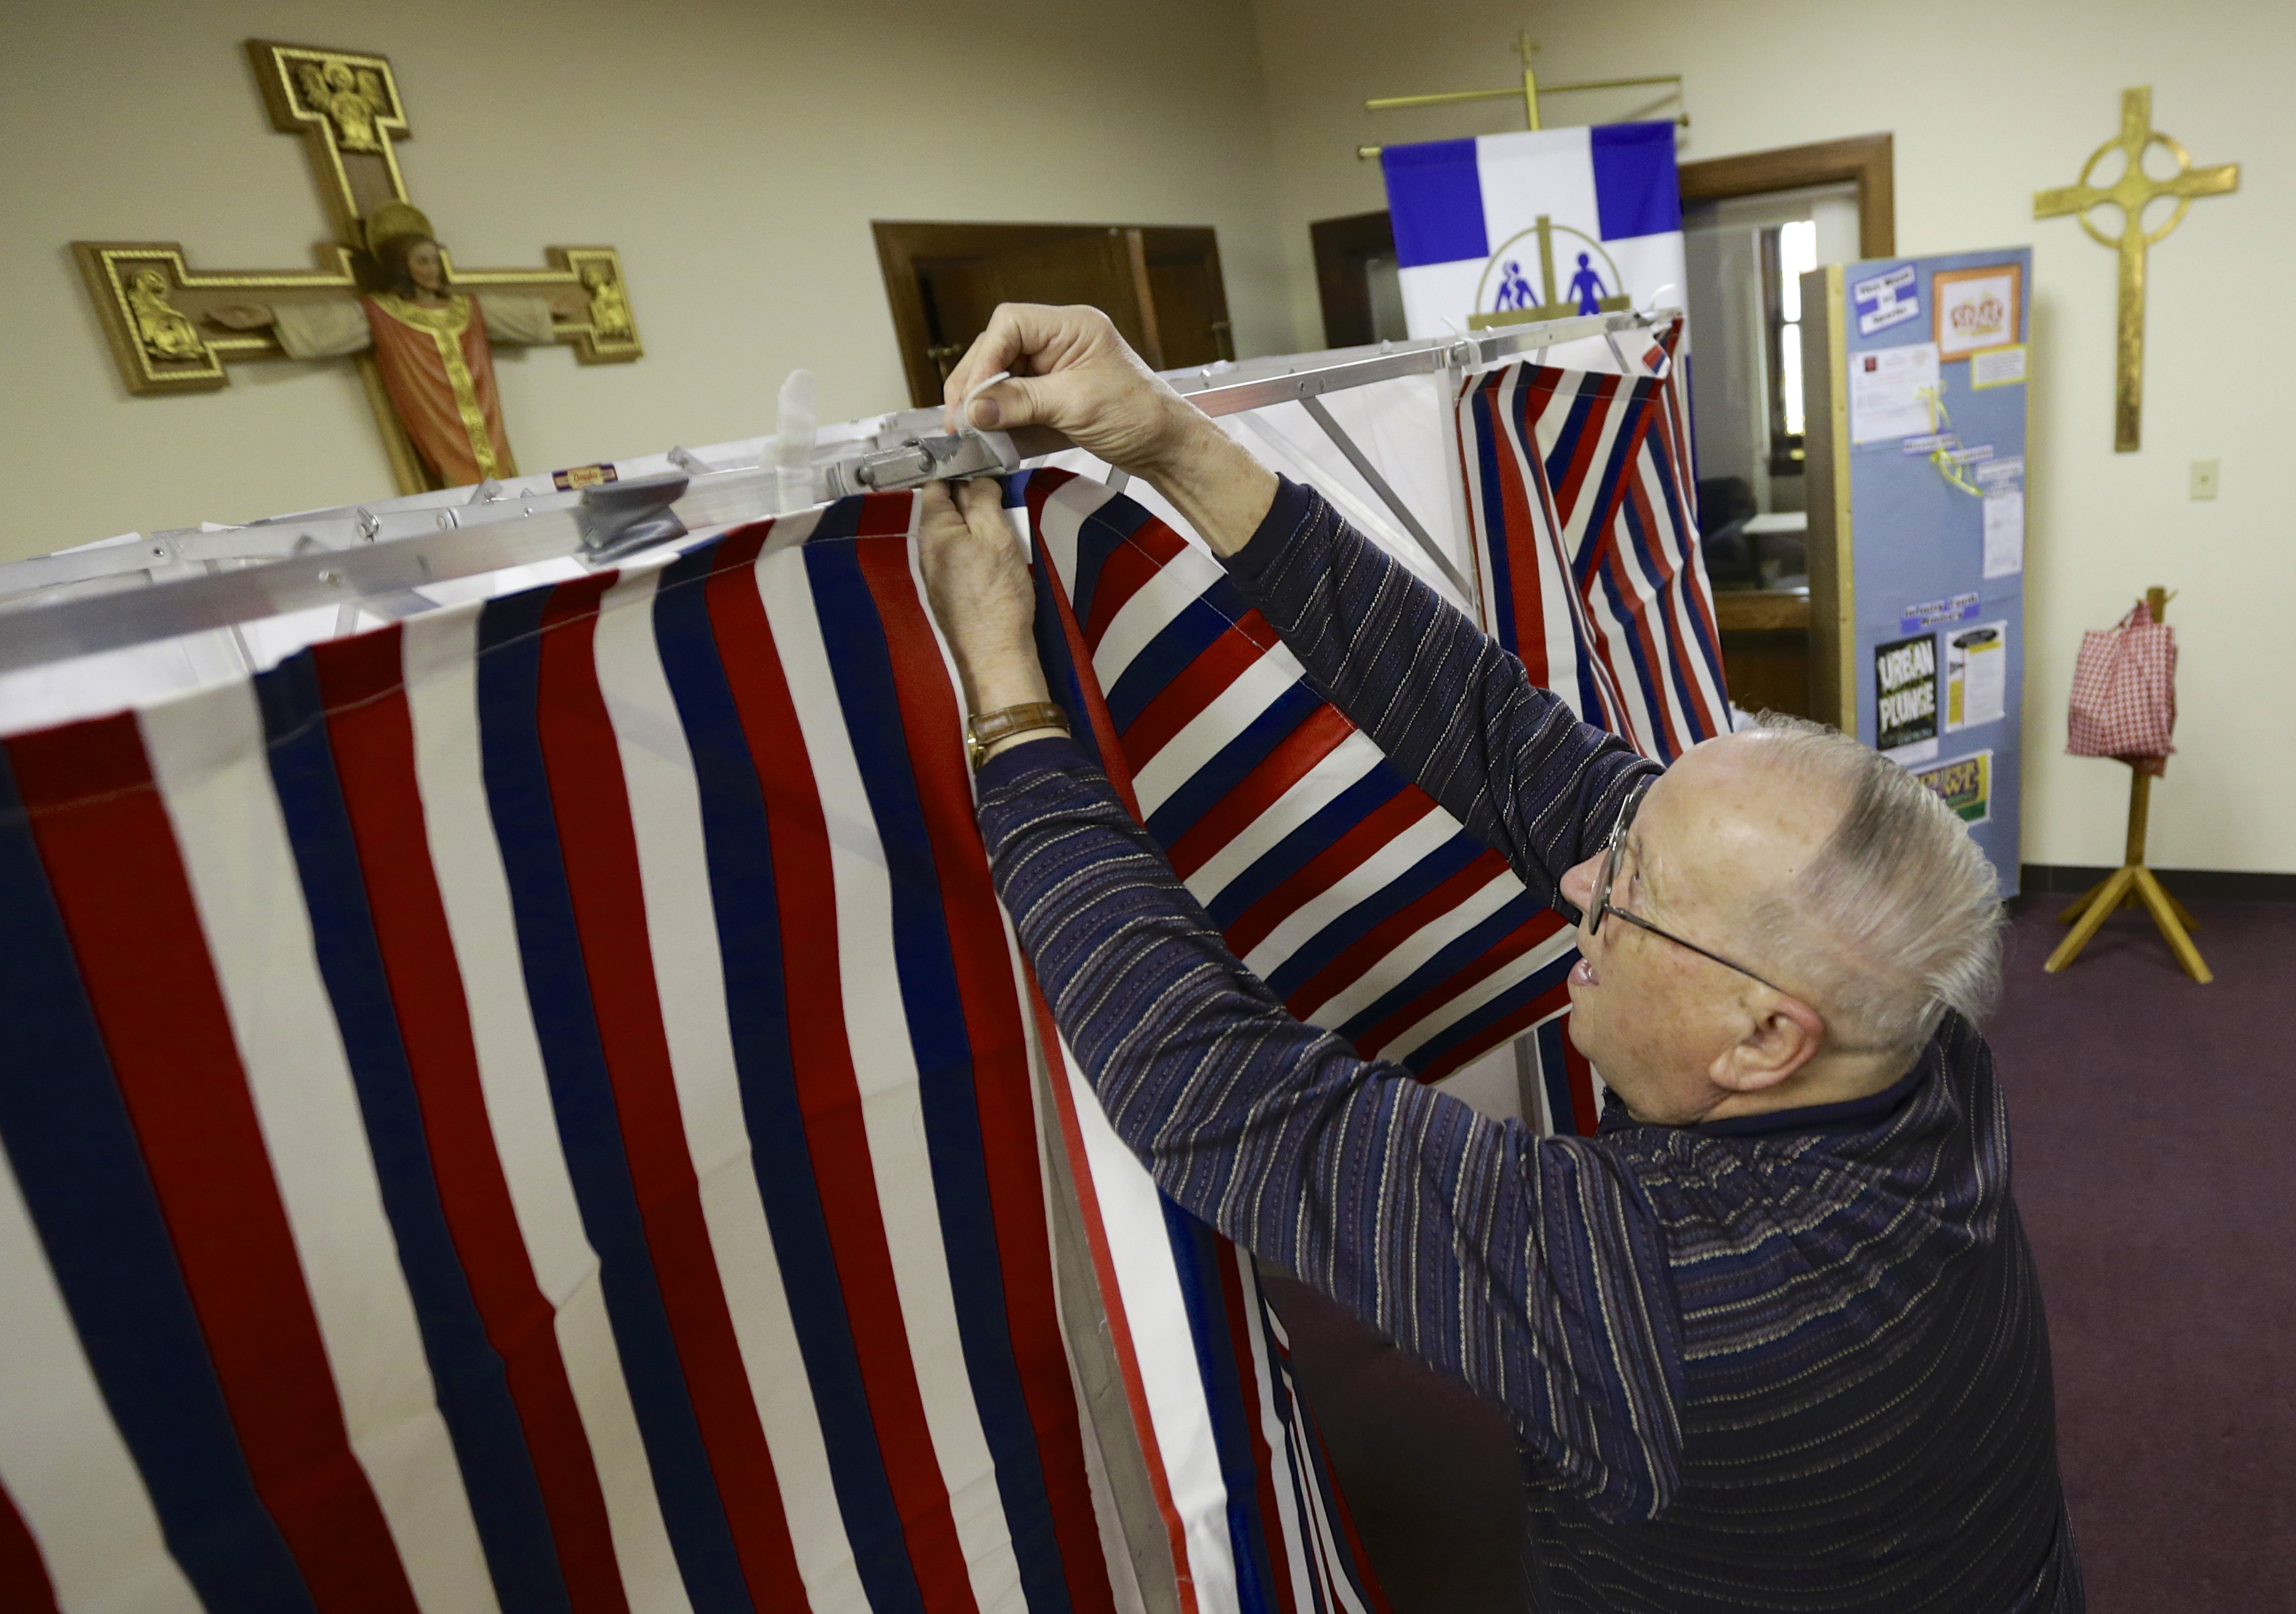 Election official Robert Buresh attaches the curtain to a polling booth at the Salem Lutheran Church polling station in Fremont, Neb., on Feb. 11, 2014. (Nati Harnik—AP)